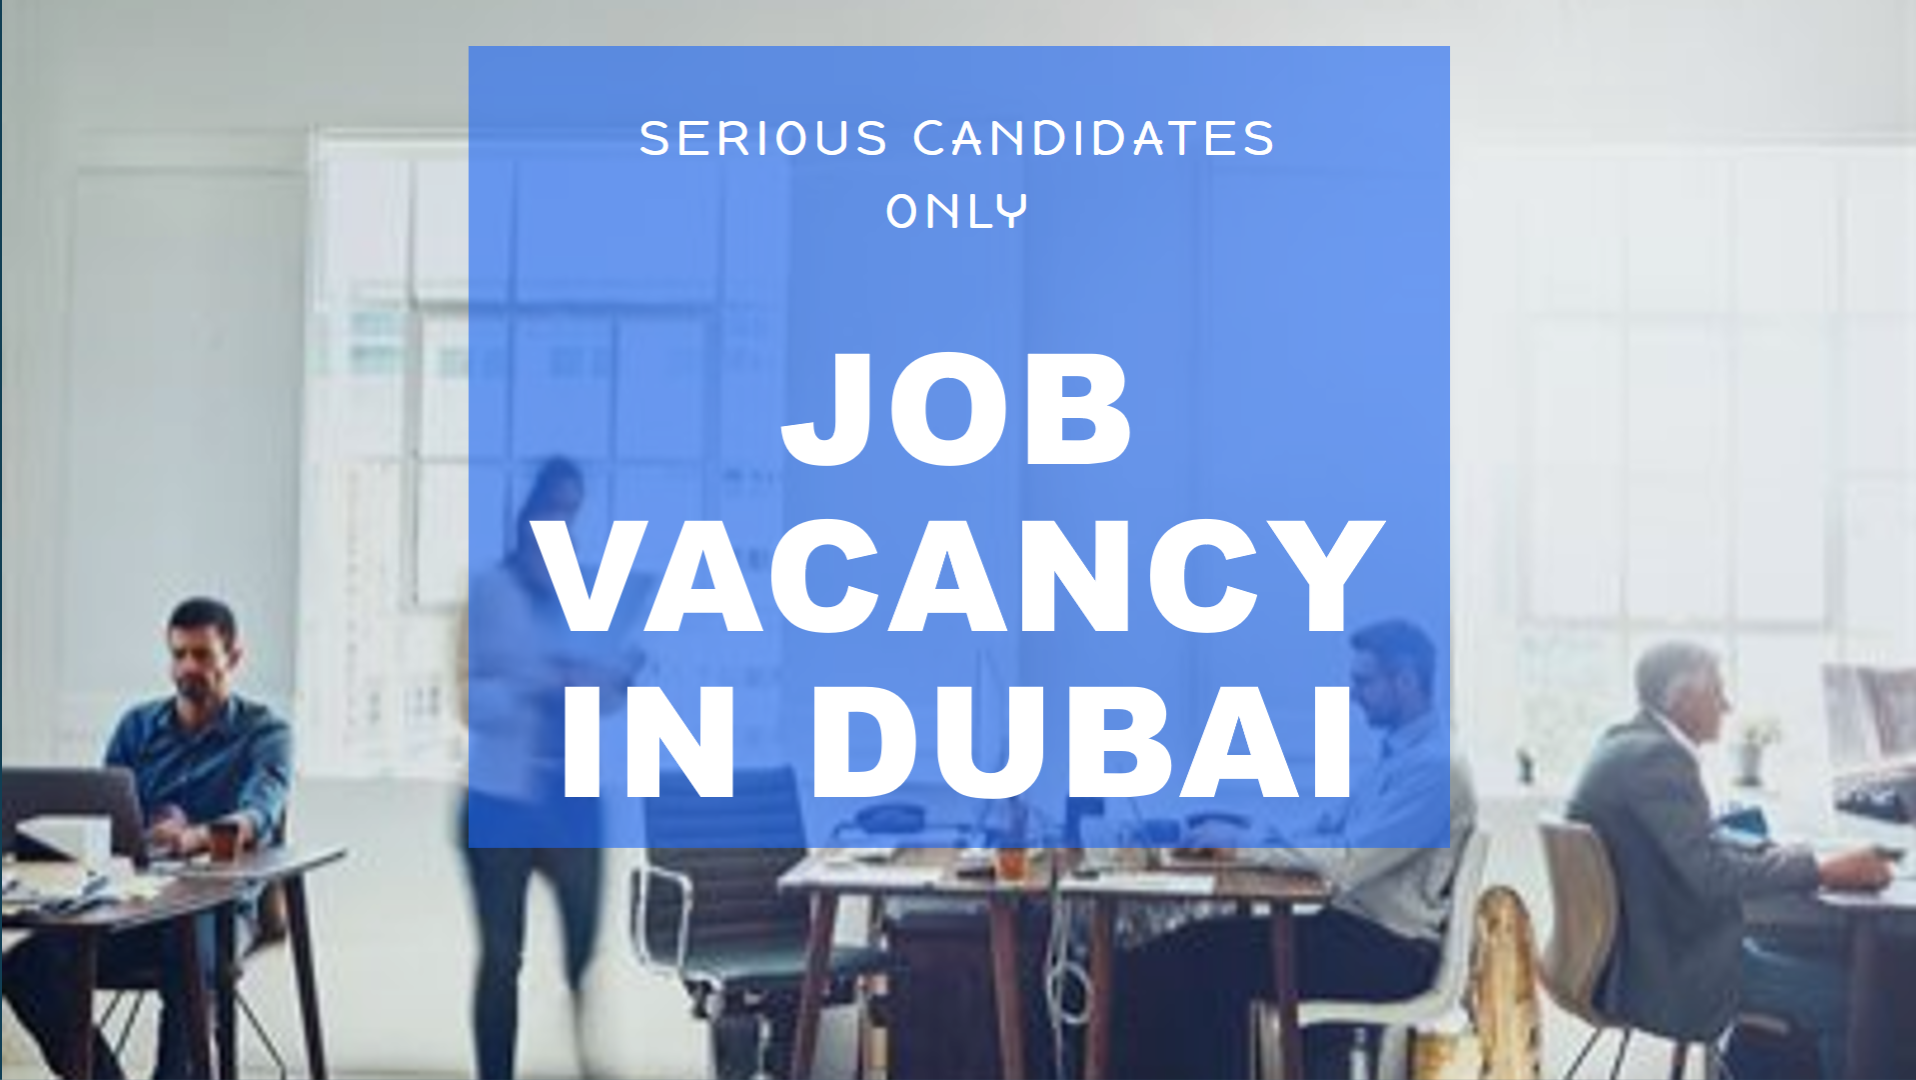 hr vacancy in dubai for Arabic and English speakers